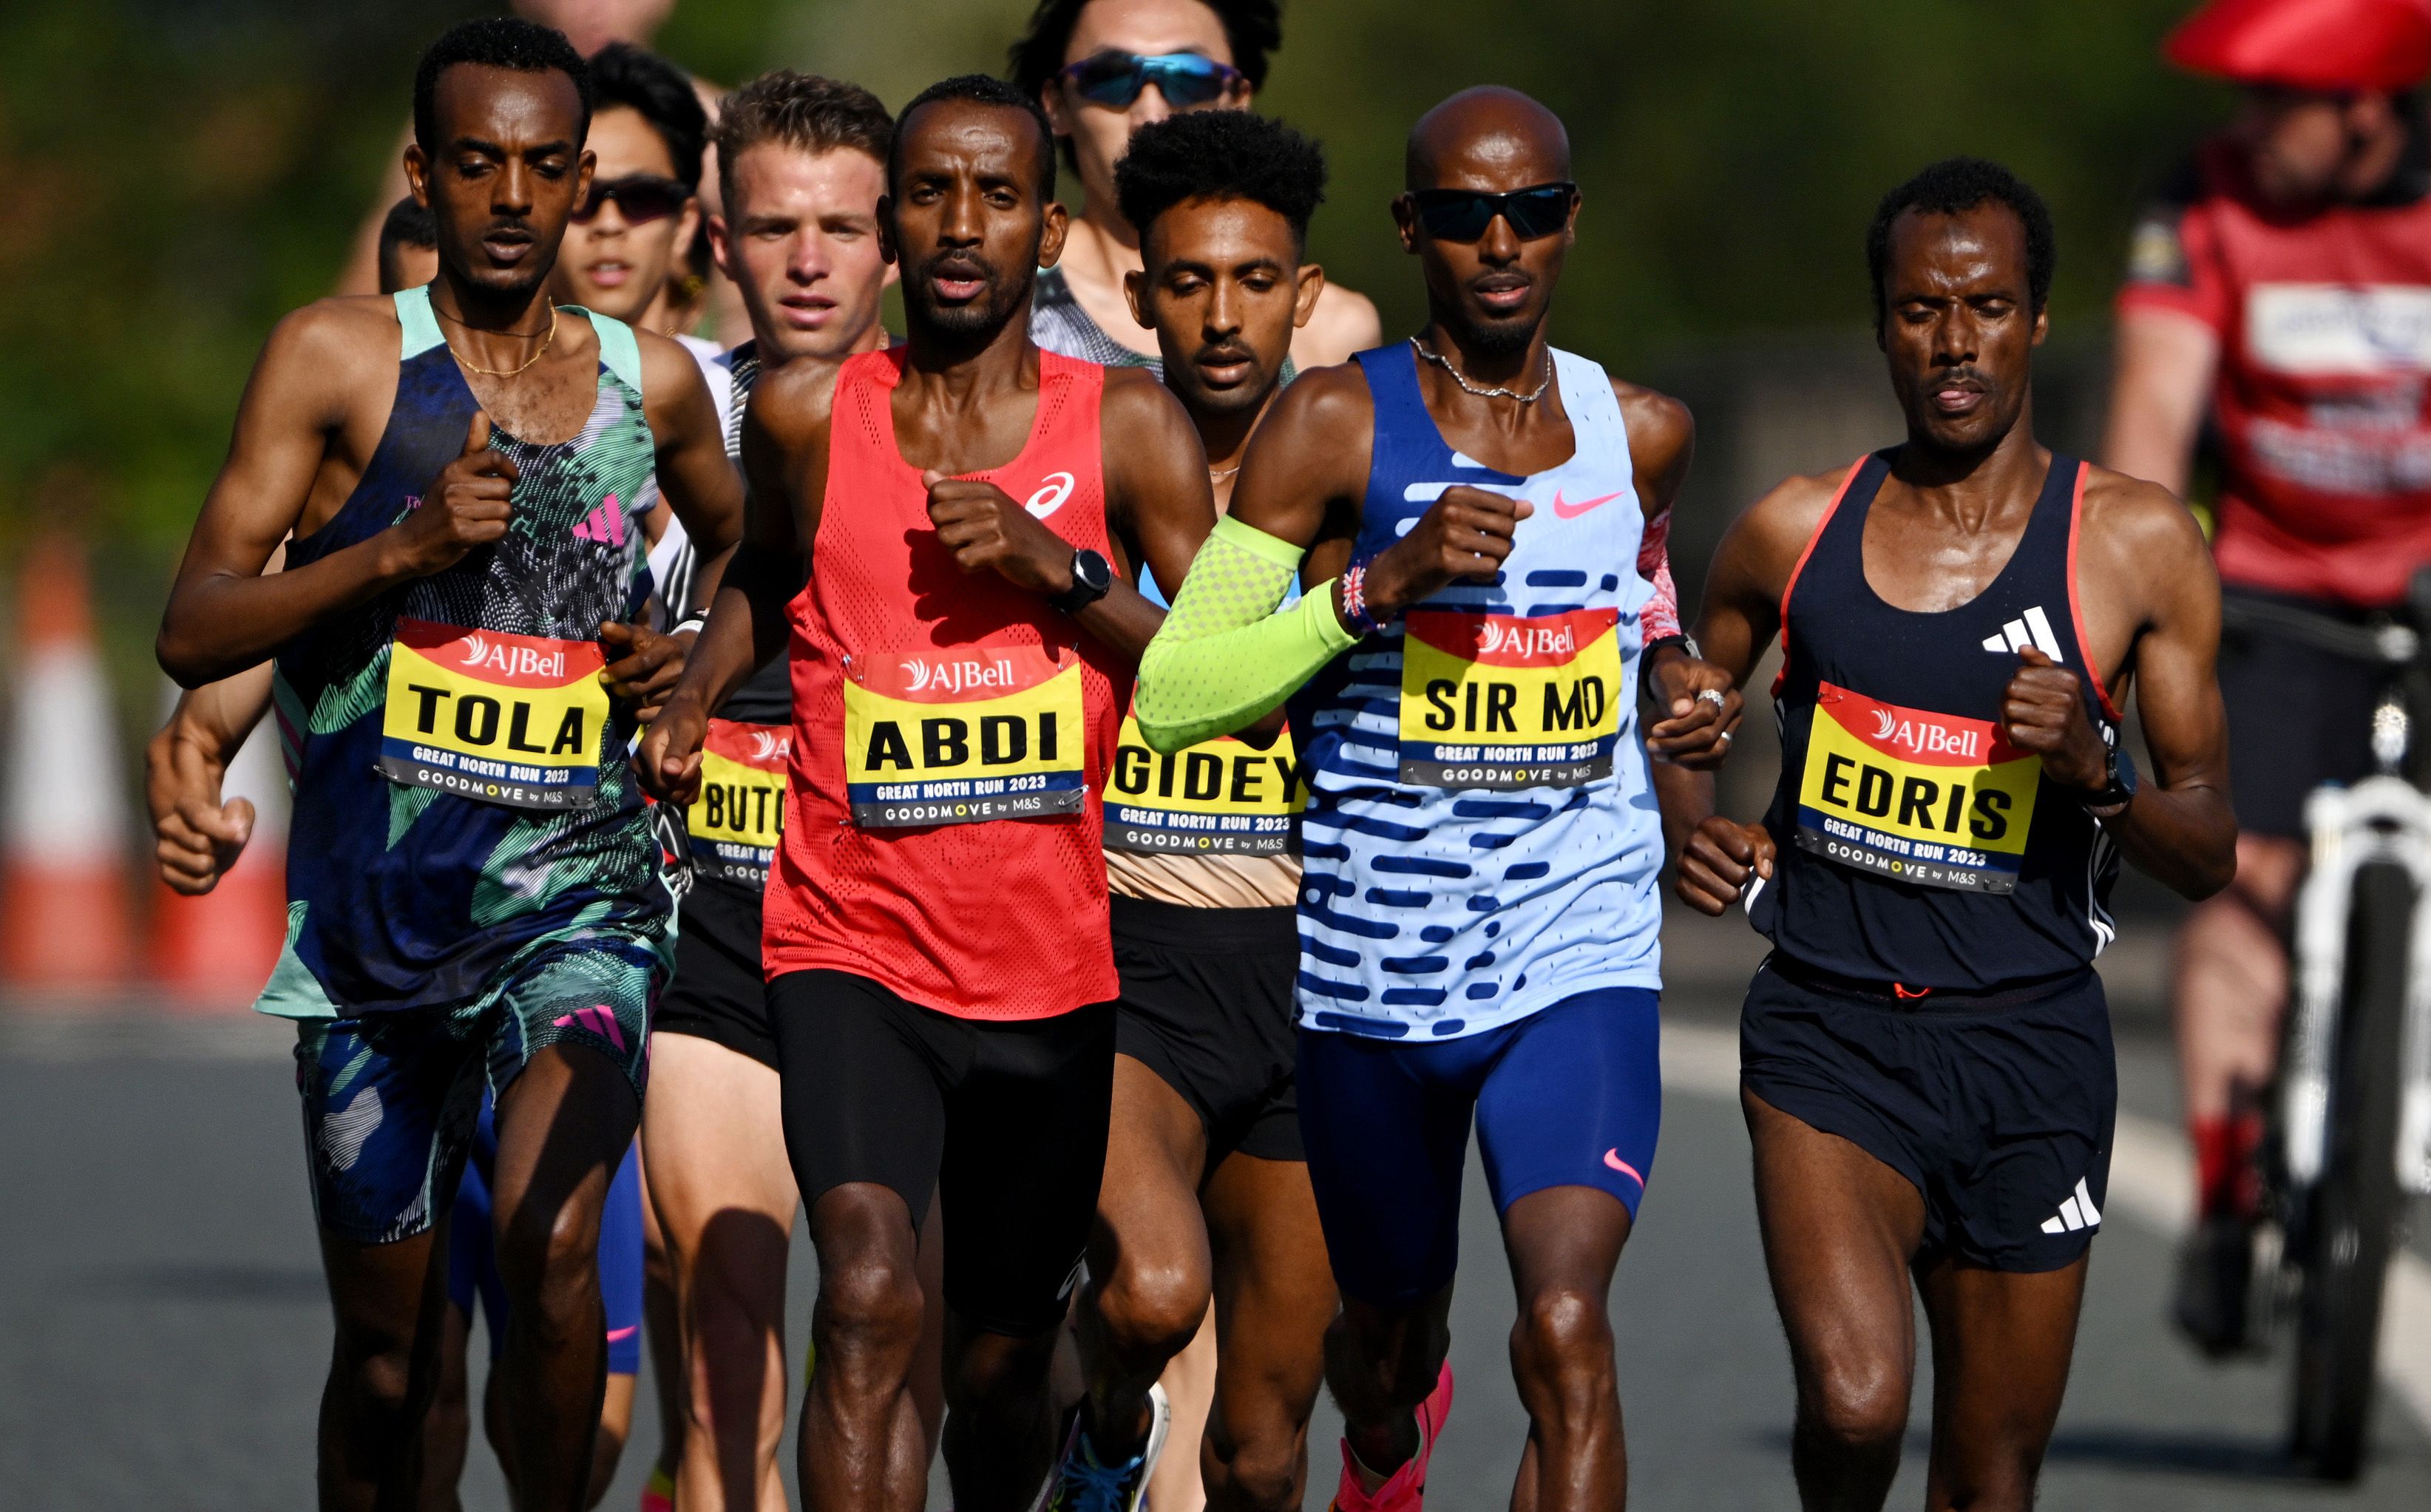 Eventual winner Tamirat Tola in the leading men's group at the Great North Run